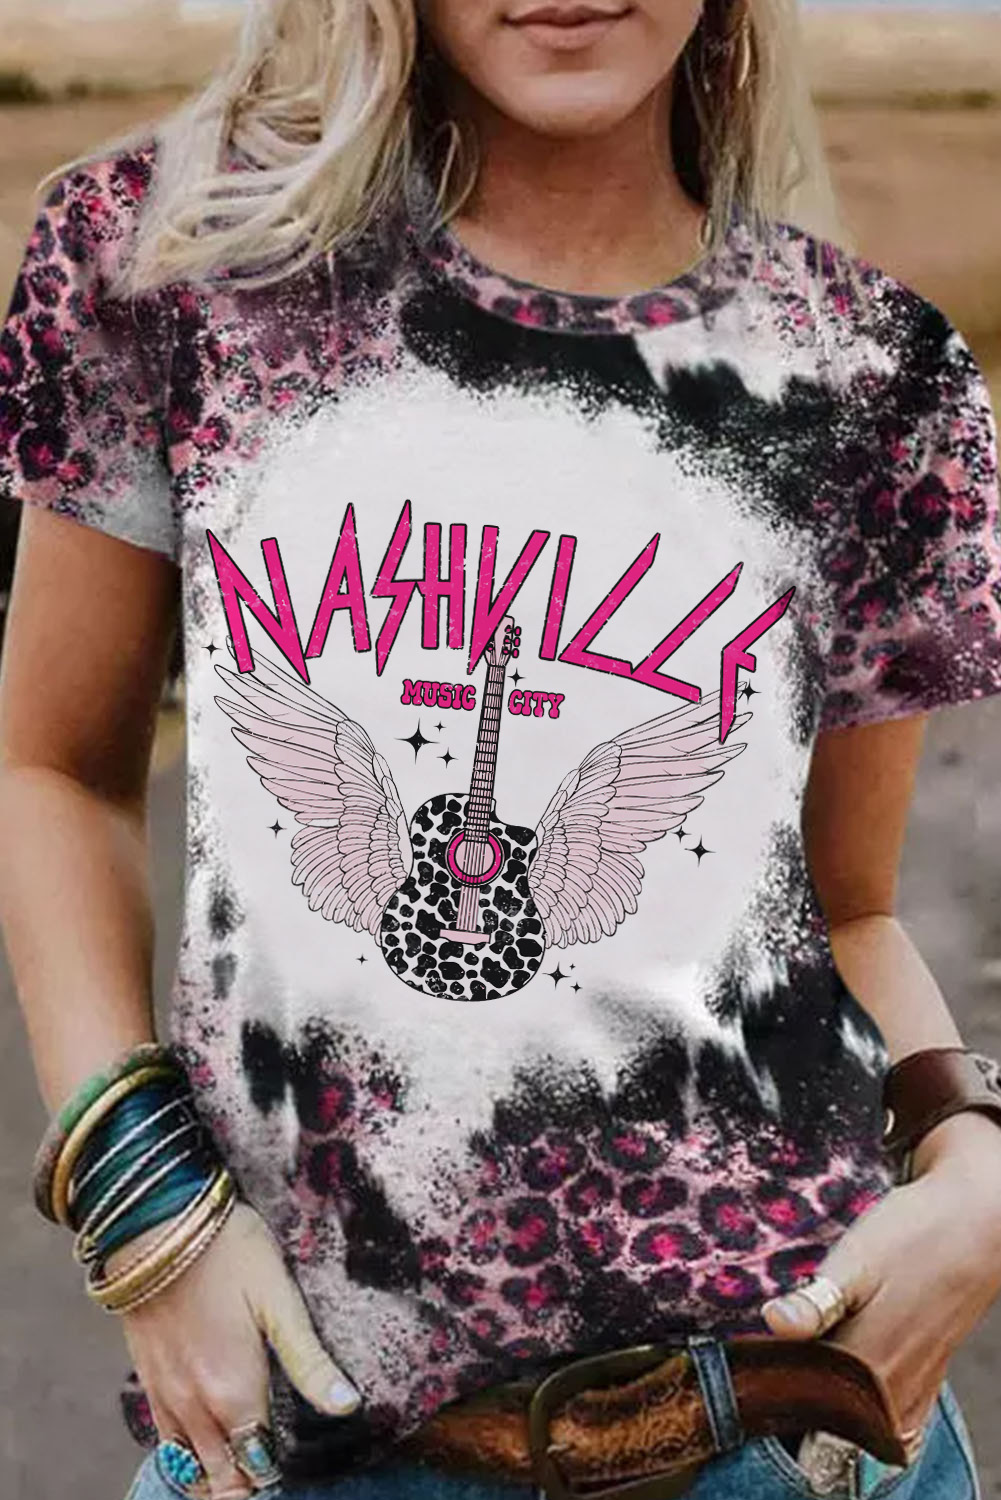 Shewin Wholesale Dropshippers Pink NASHVILLE MUSIC CITY Graphic Bleached Leopard Tee